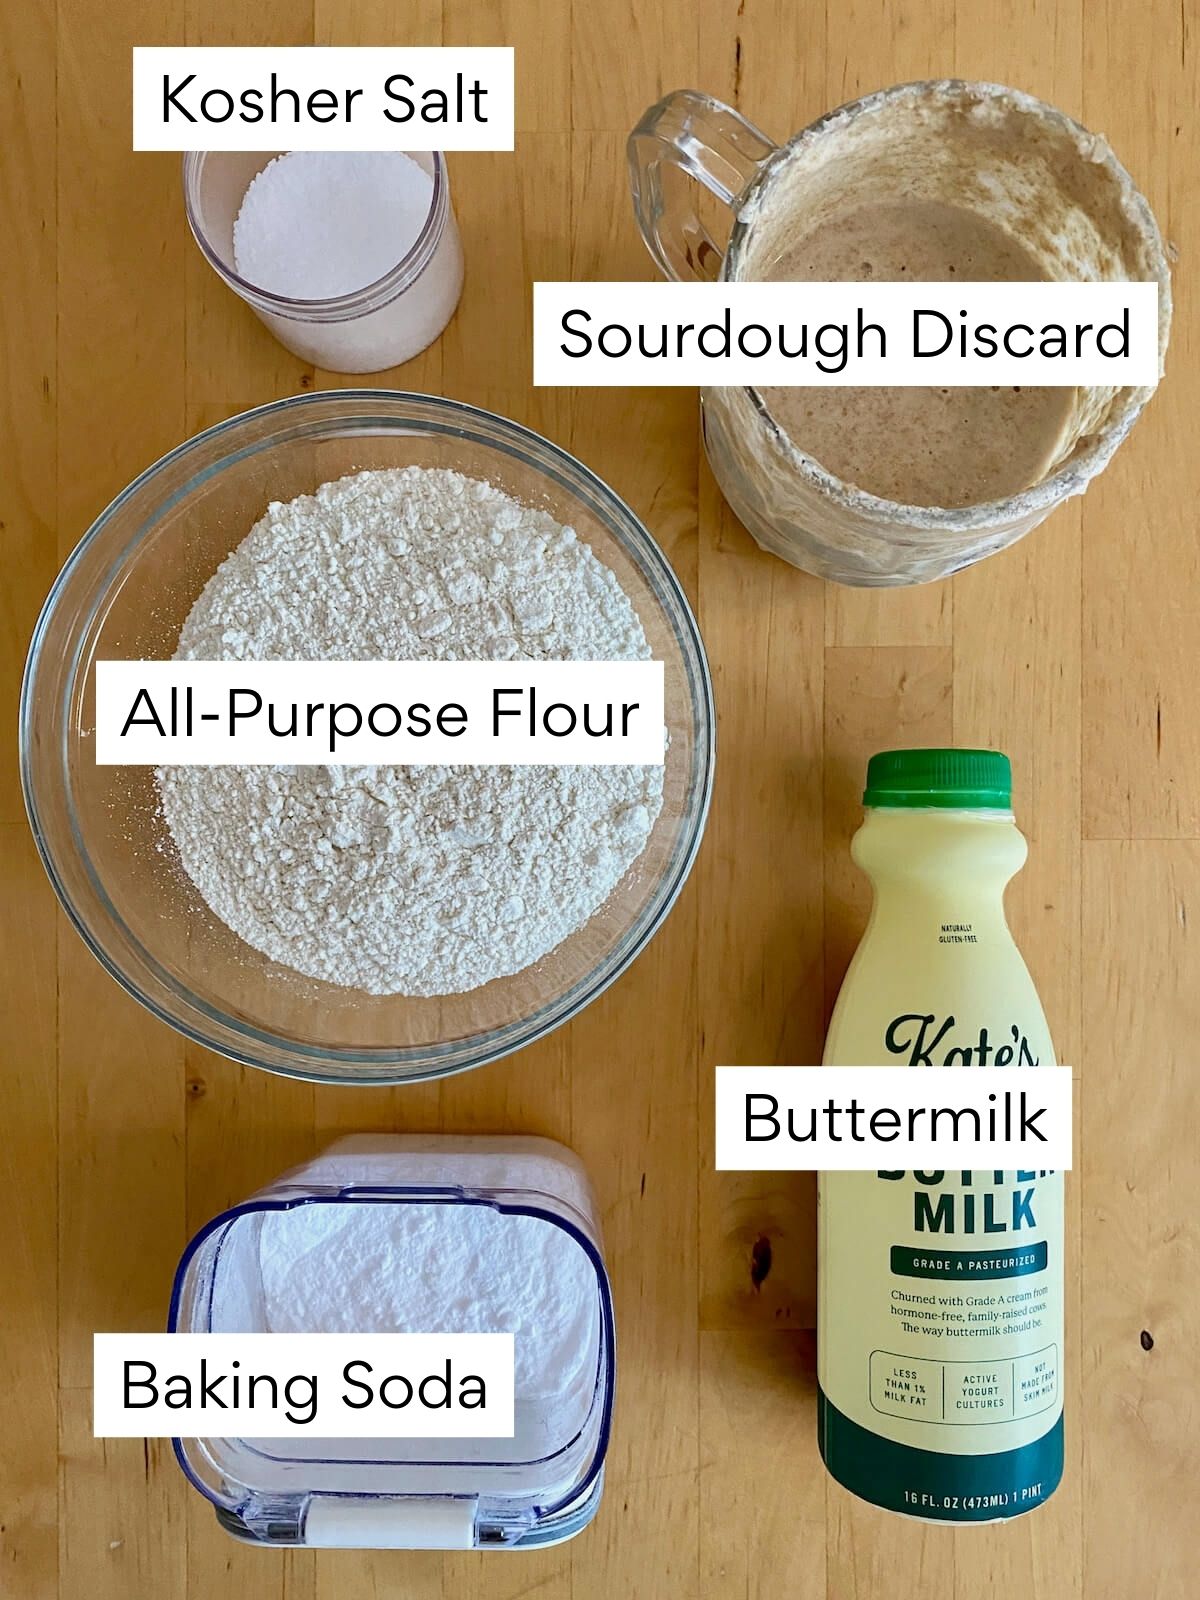 The ingredients to make sourdough Irish soda bread. Each ingredient is labeled with text. They include kosher salt, sourdough discard, all-purpose flour, buttermilk, and baking soda.